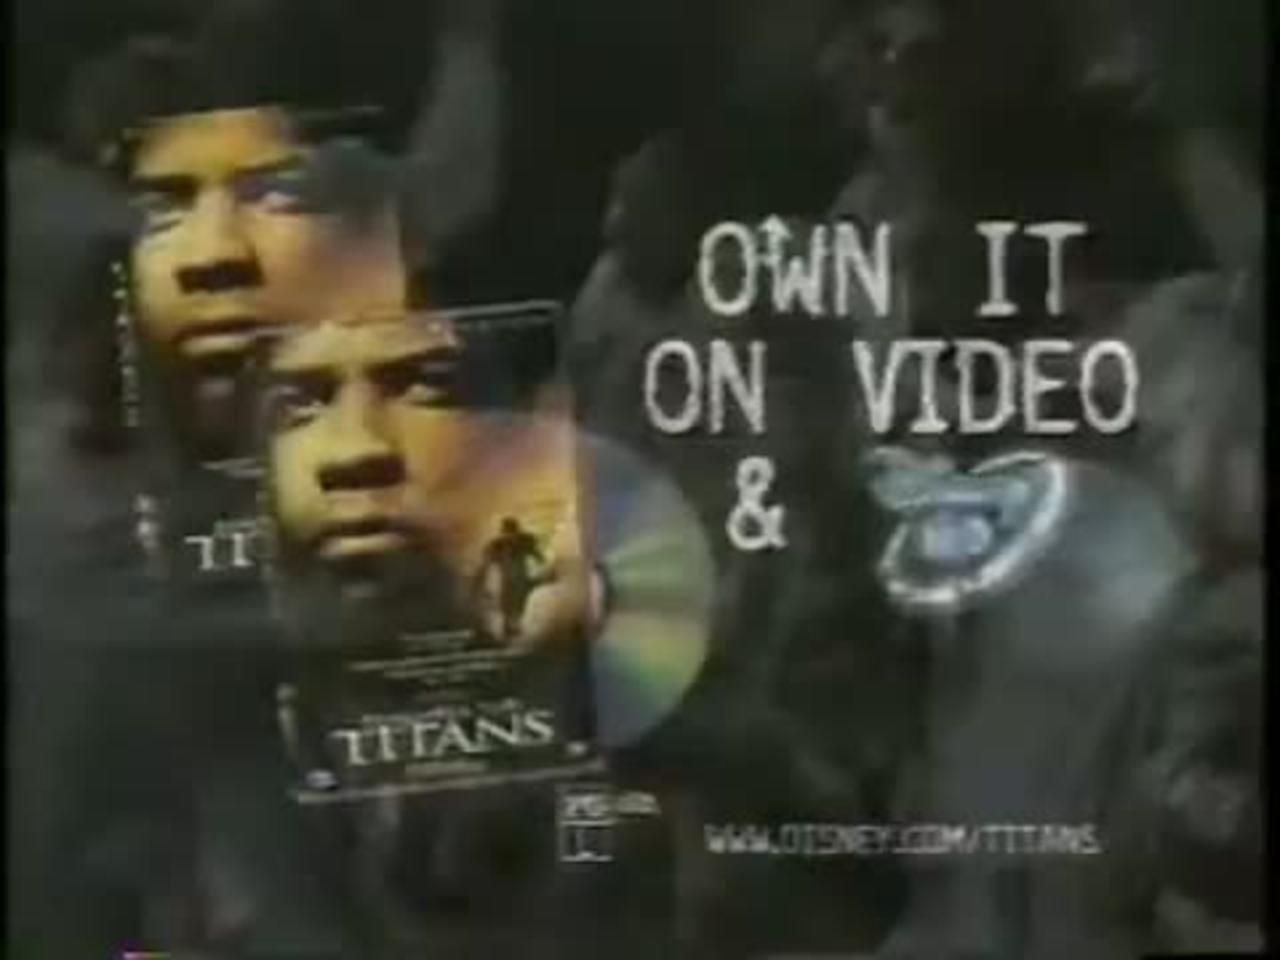 March 27, 2001 - 'Remember the Titans' Comes to Home Video